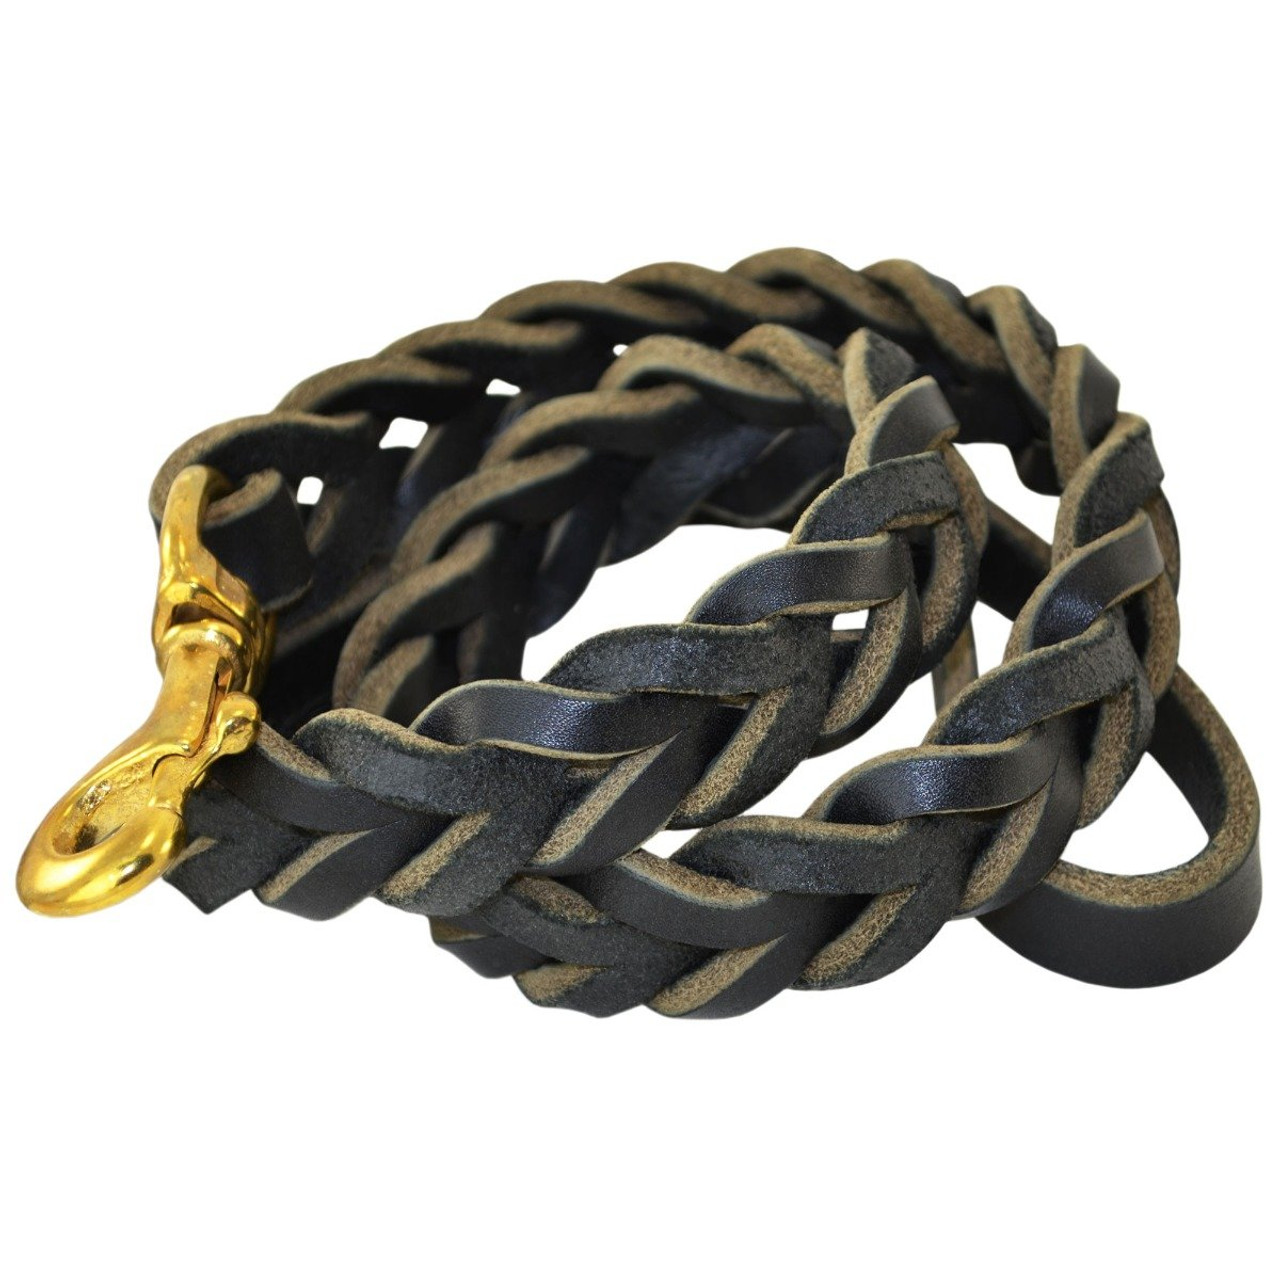 Braid Leather Dog Leash or Lead Real Genuine Leather Dark Brown Braided  Leather and Heavy-duty Brass Clasp Featuring 'love Knot' 